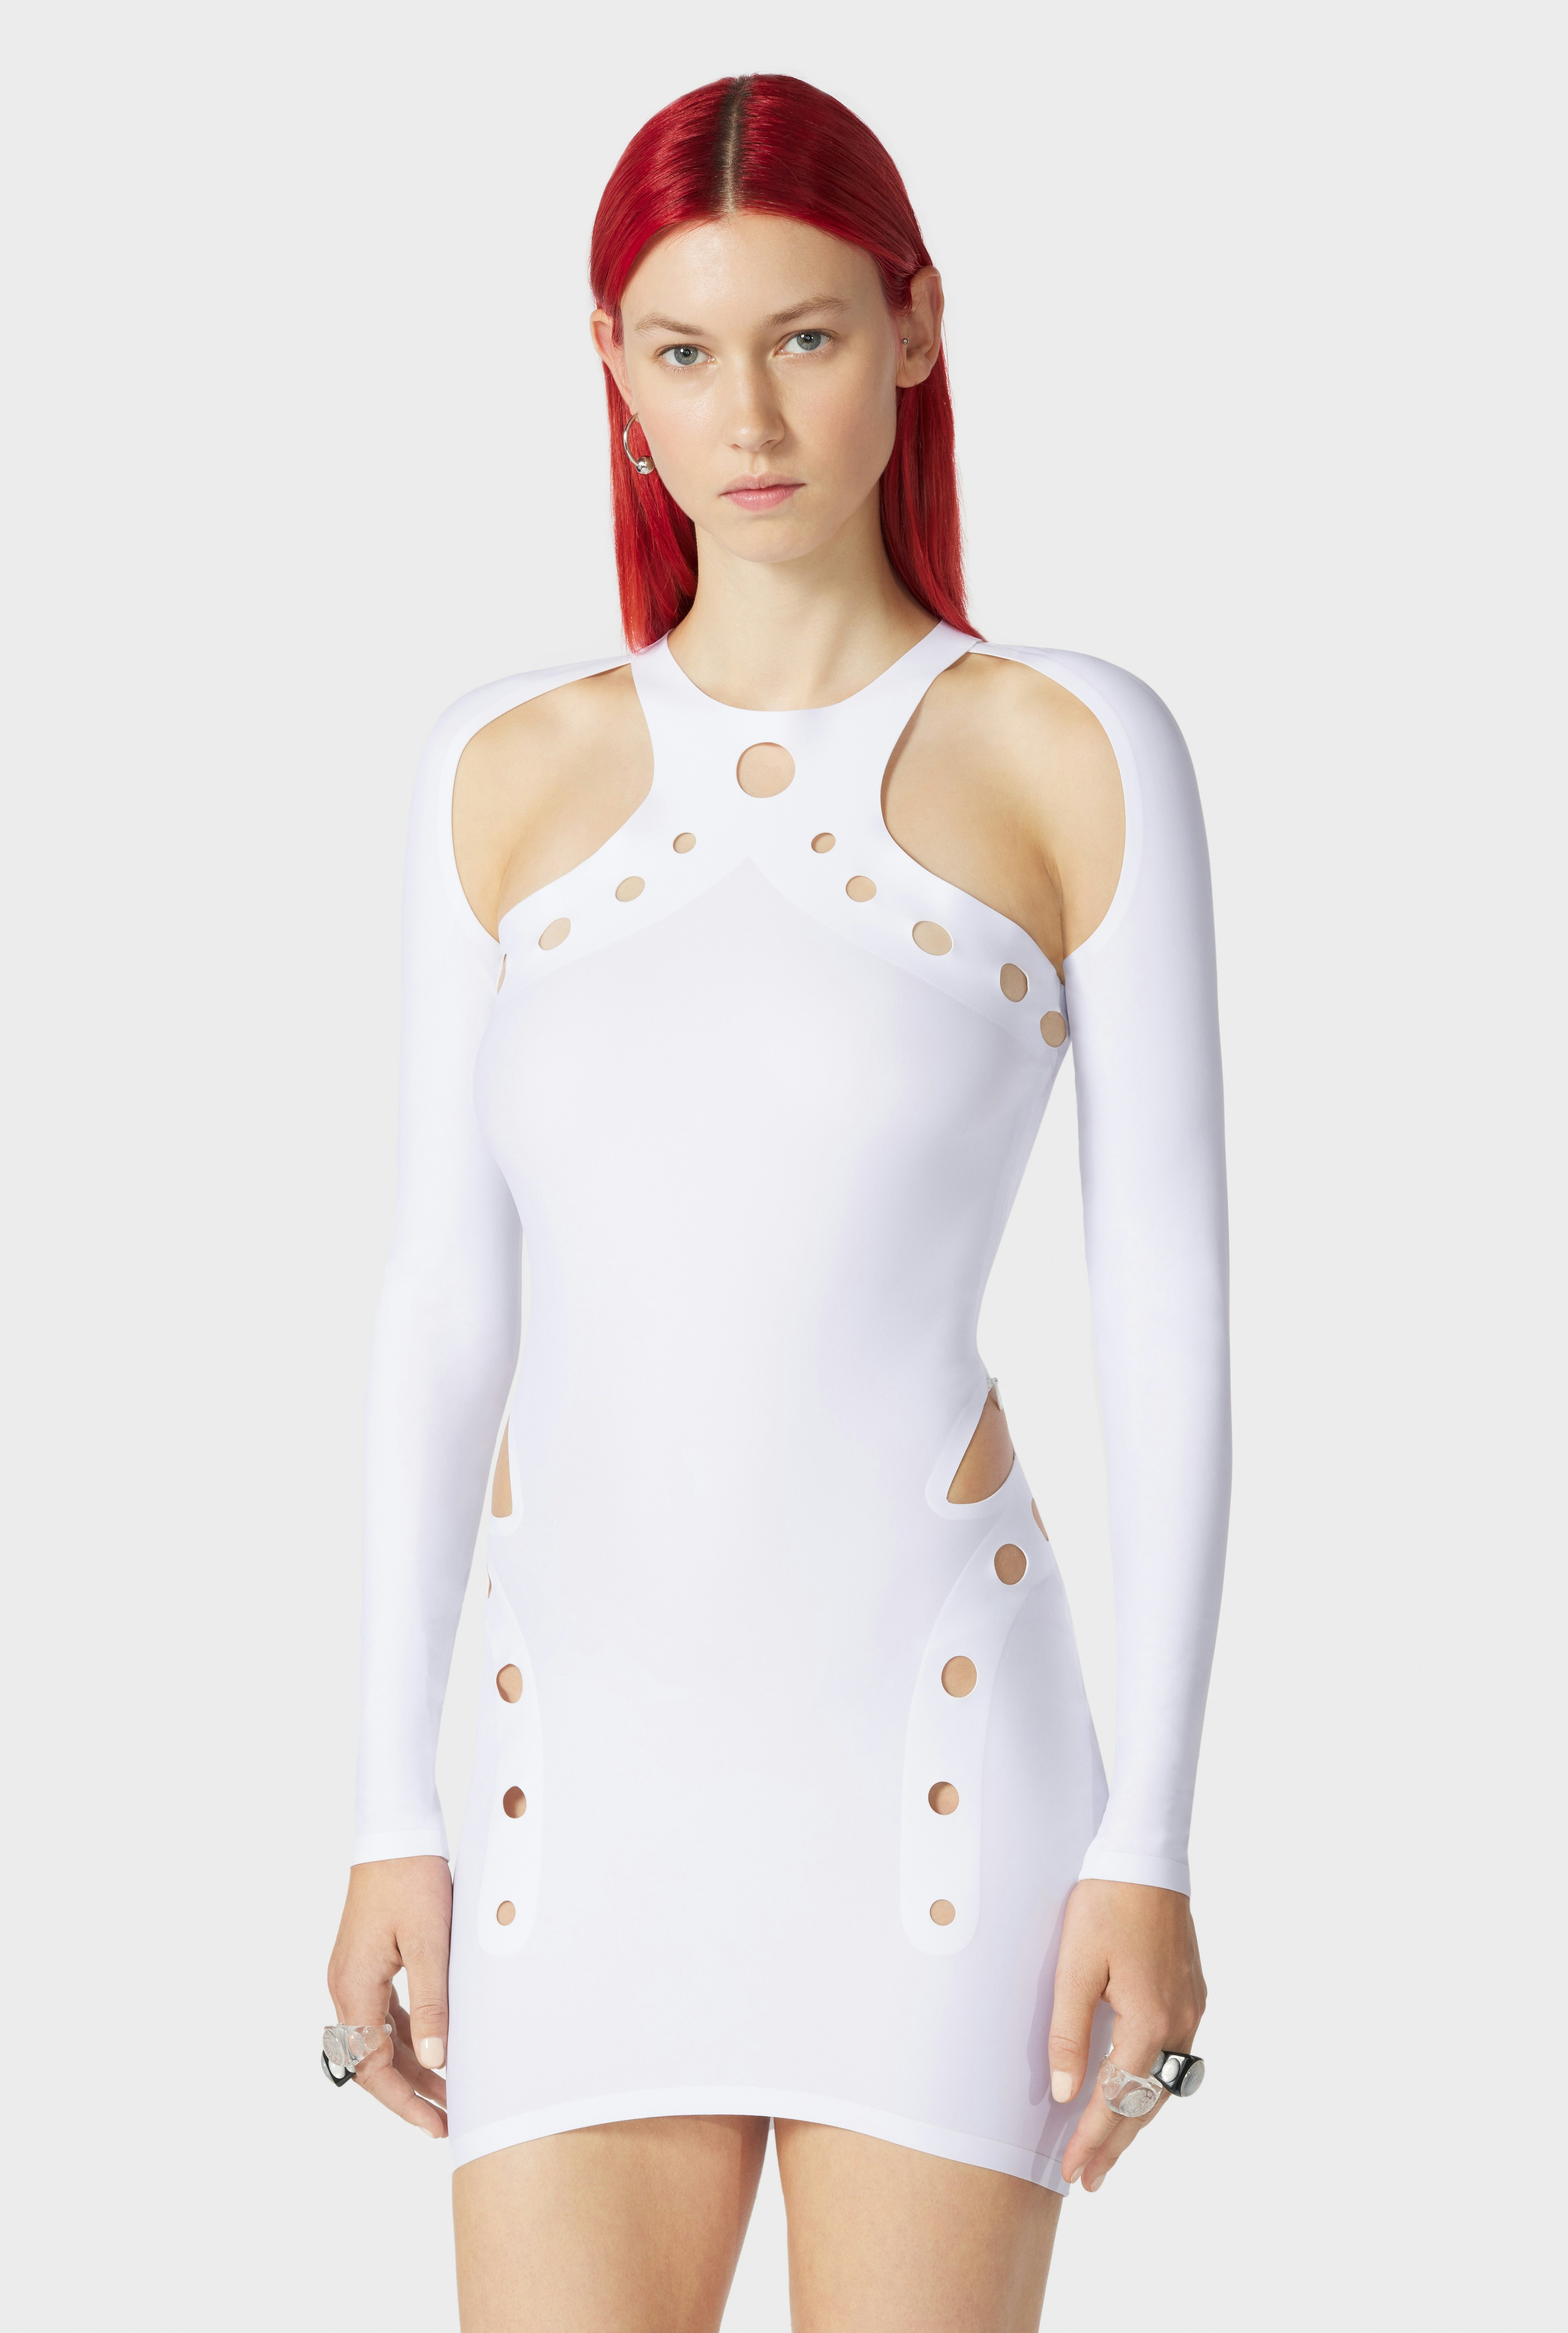 The White Perforated Dress Jean Paul Gaultier